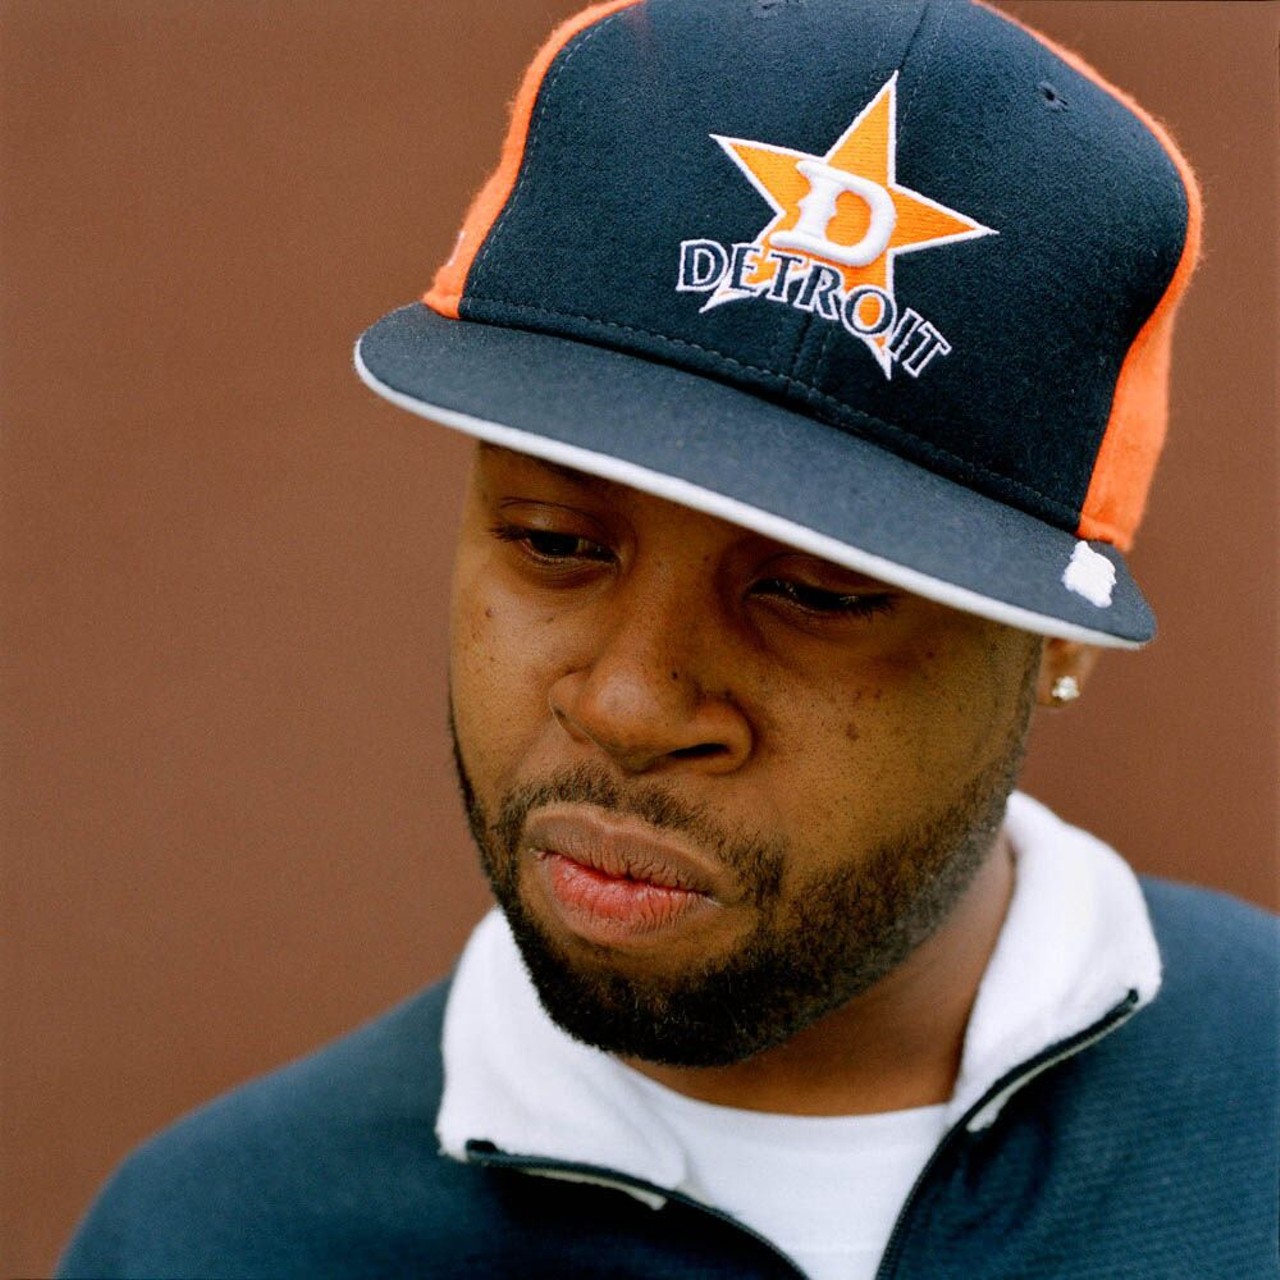 J Dilla
Renowned as a groundbreaking figure in hip-hop production, J Dilla, born James Dewitt Yancey, spent much of his life in Detroit. His innovative off-kilter beats influenced an entire era of hip-hop, collaborating with icons such as Slum Village, the Pharcyde, Erykah Badu, and Common.